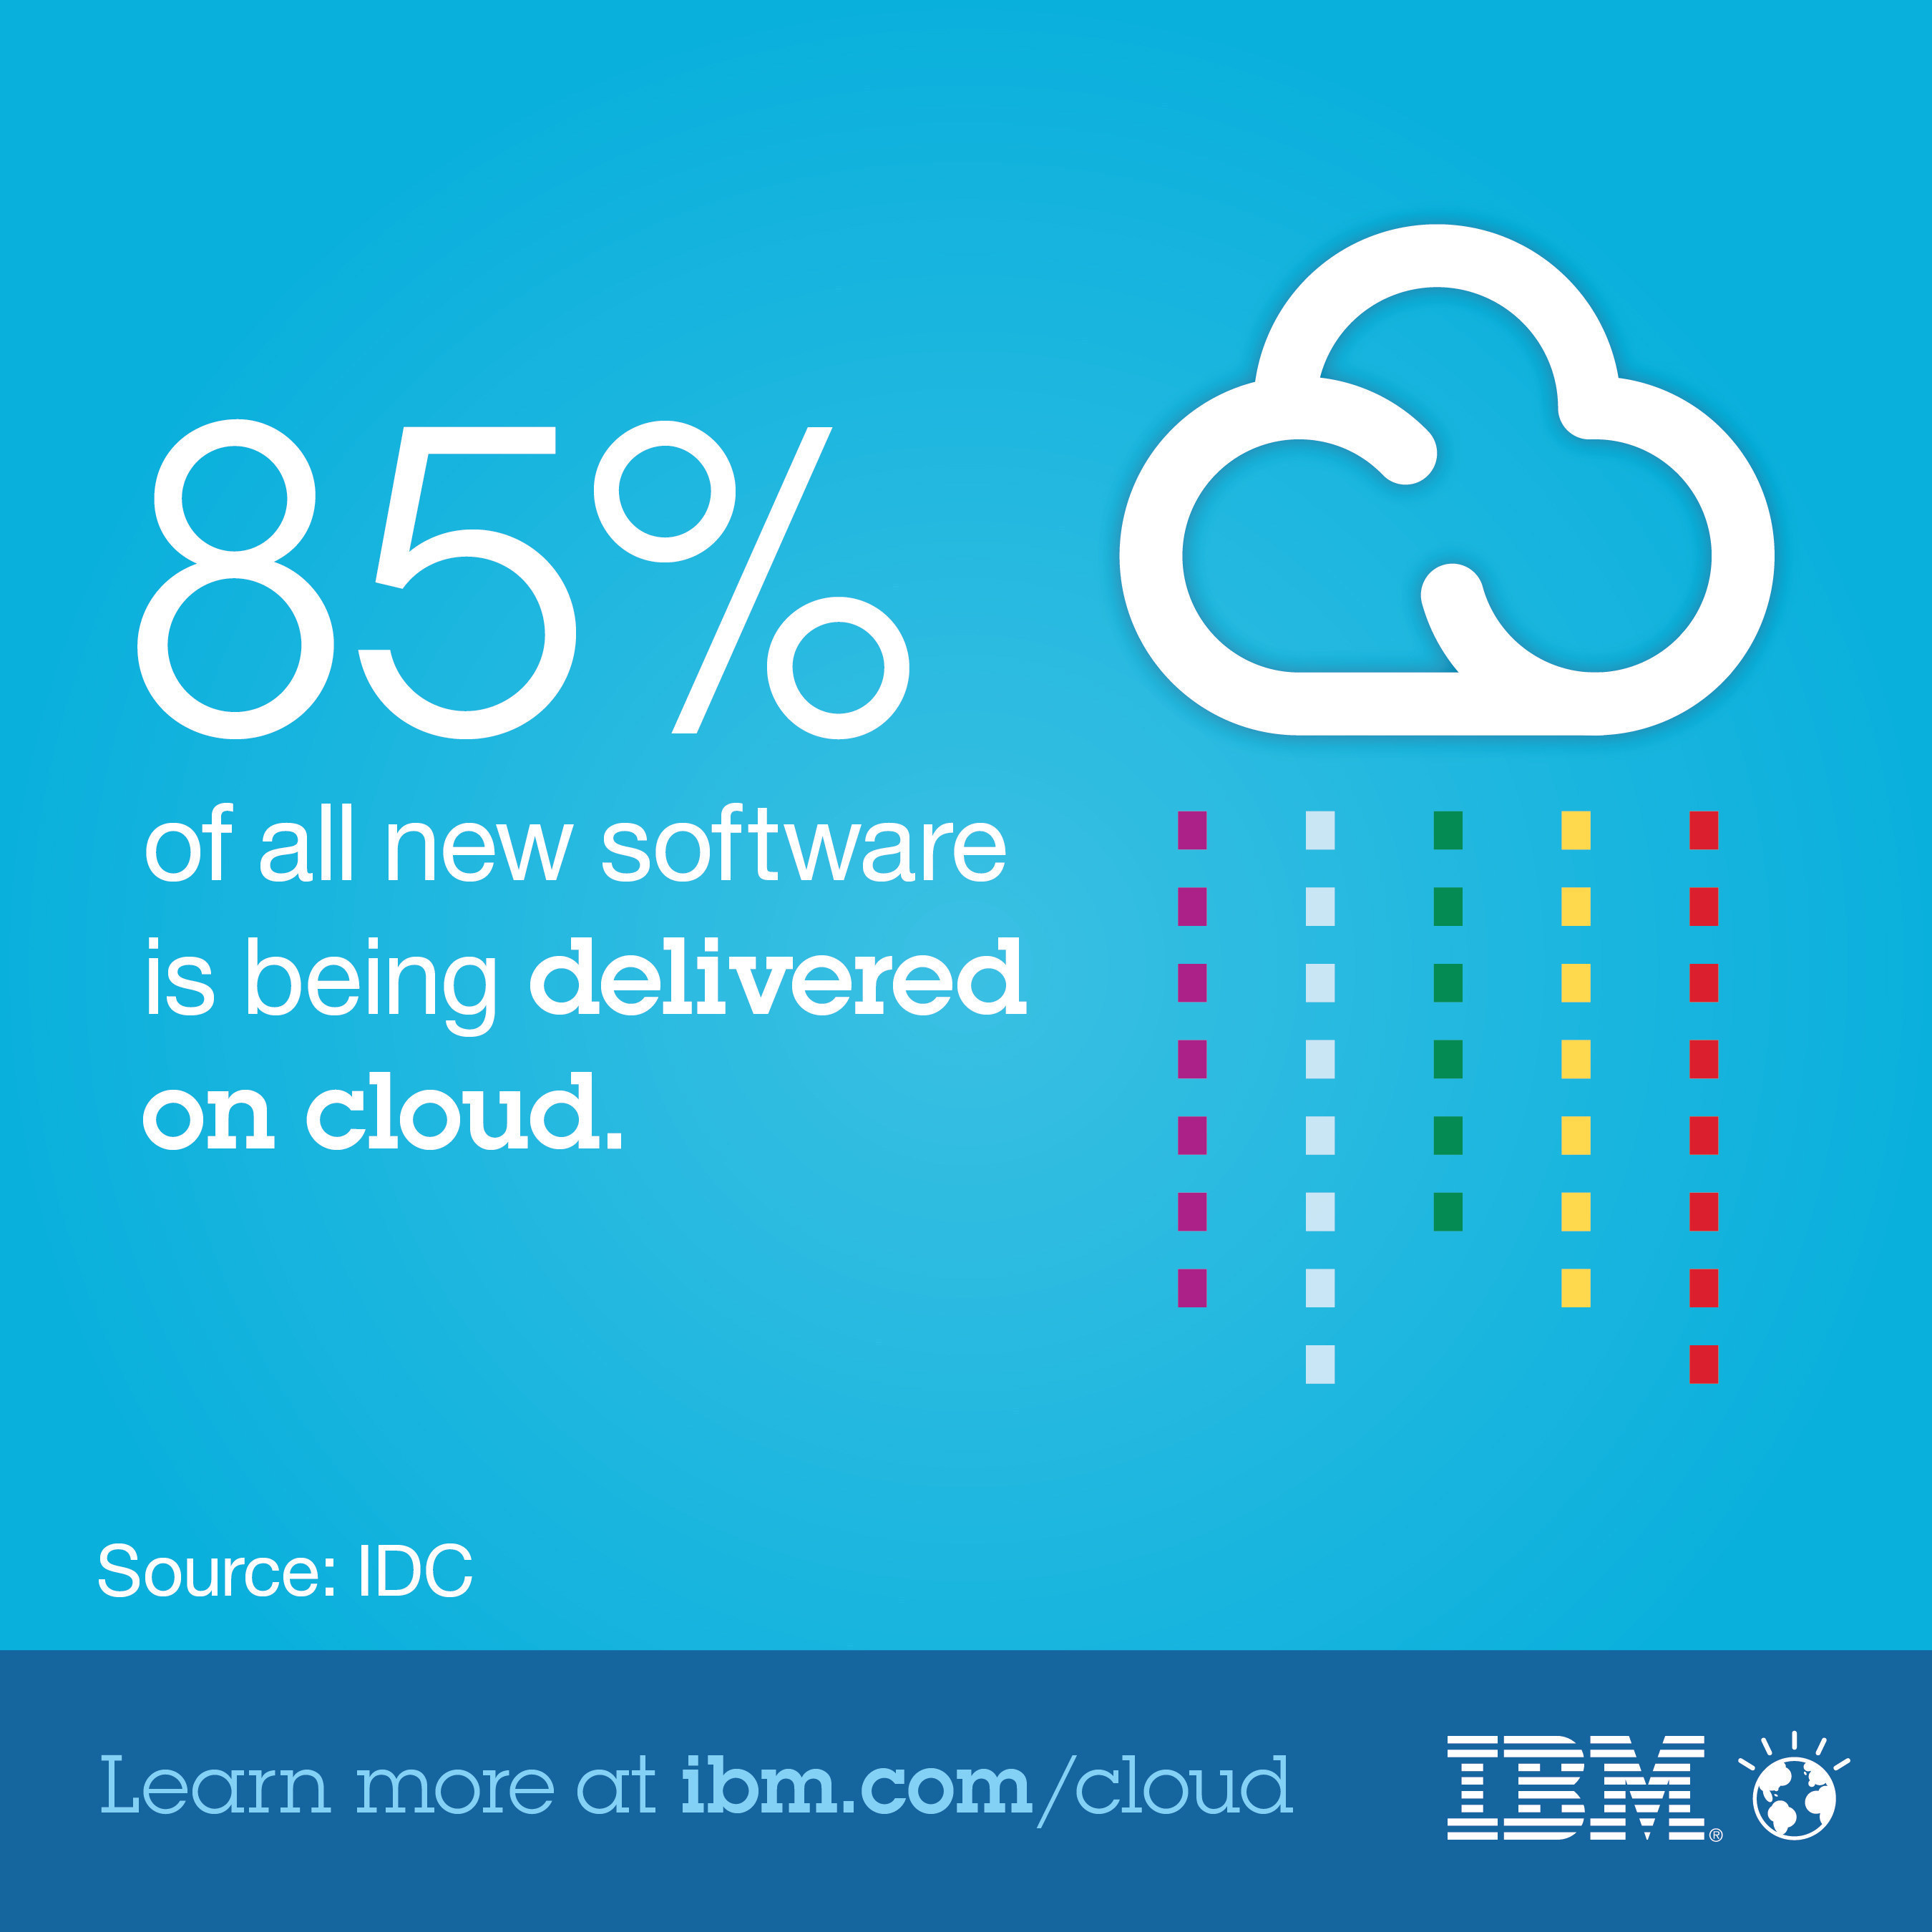 85 percent of all new software is being delivered on cloud